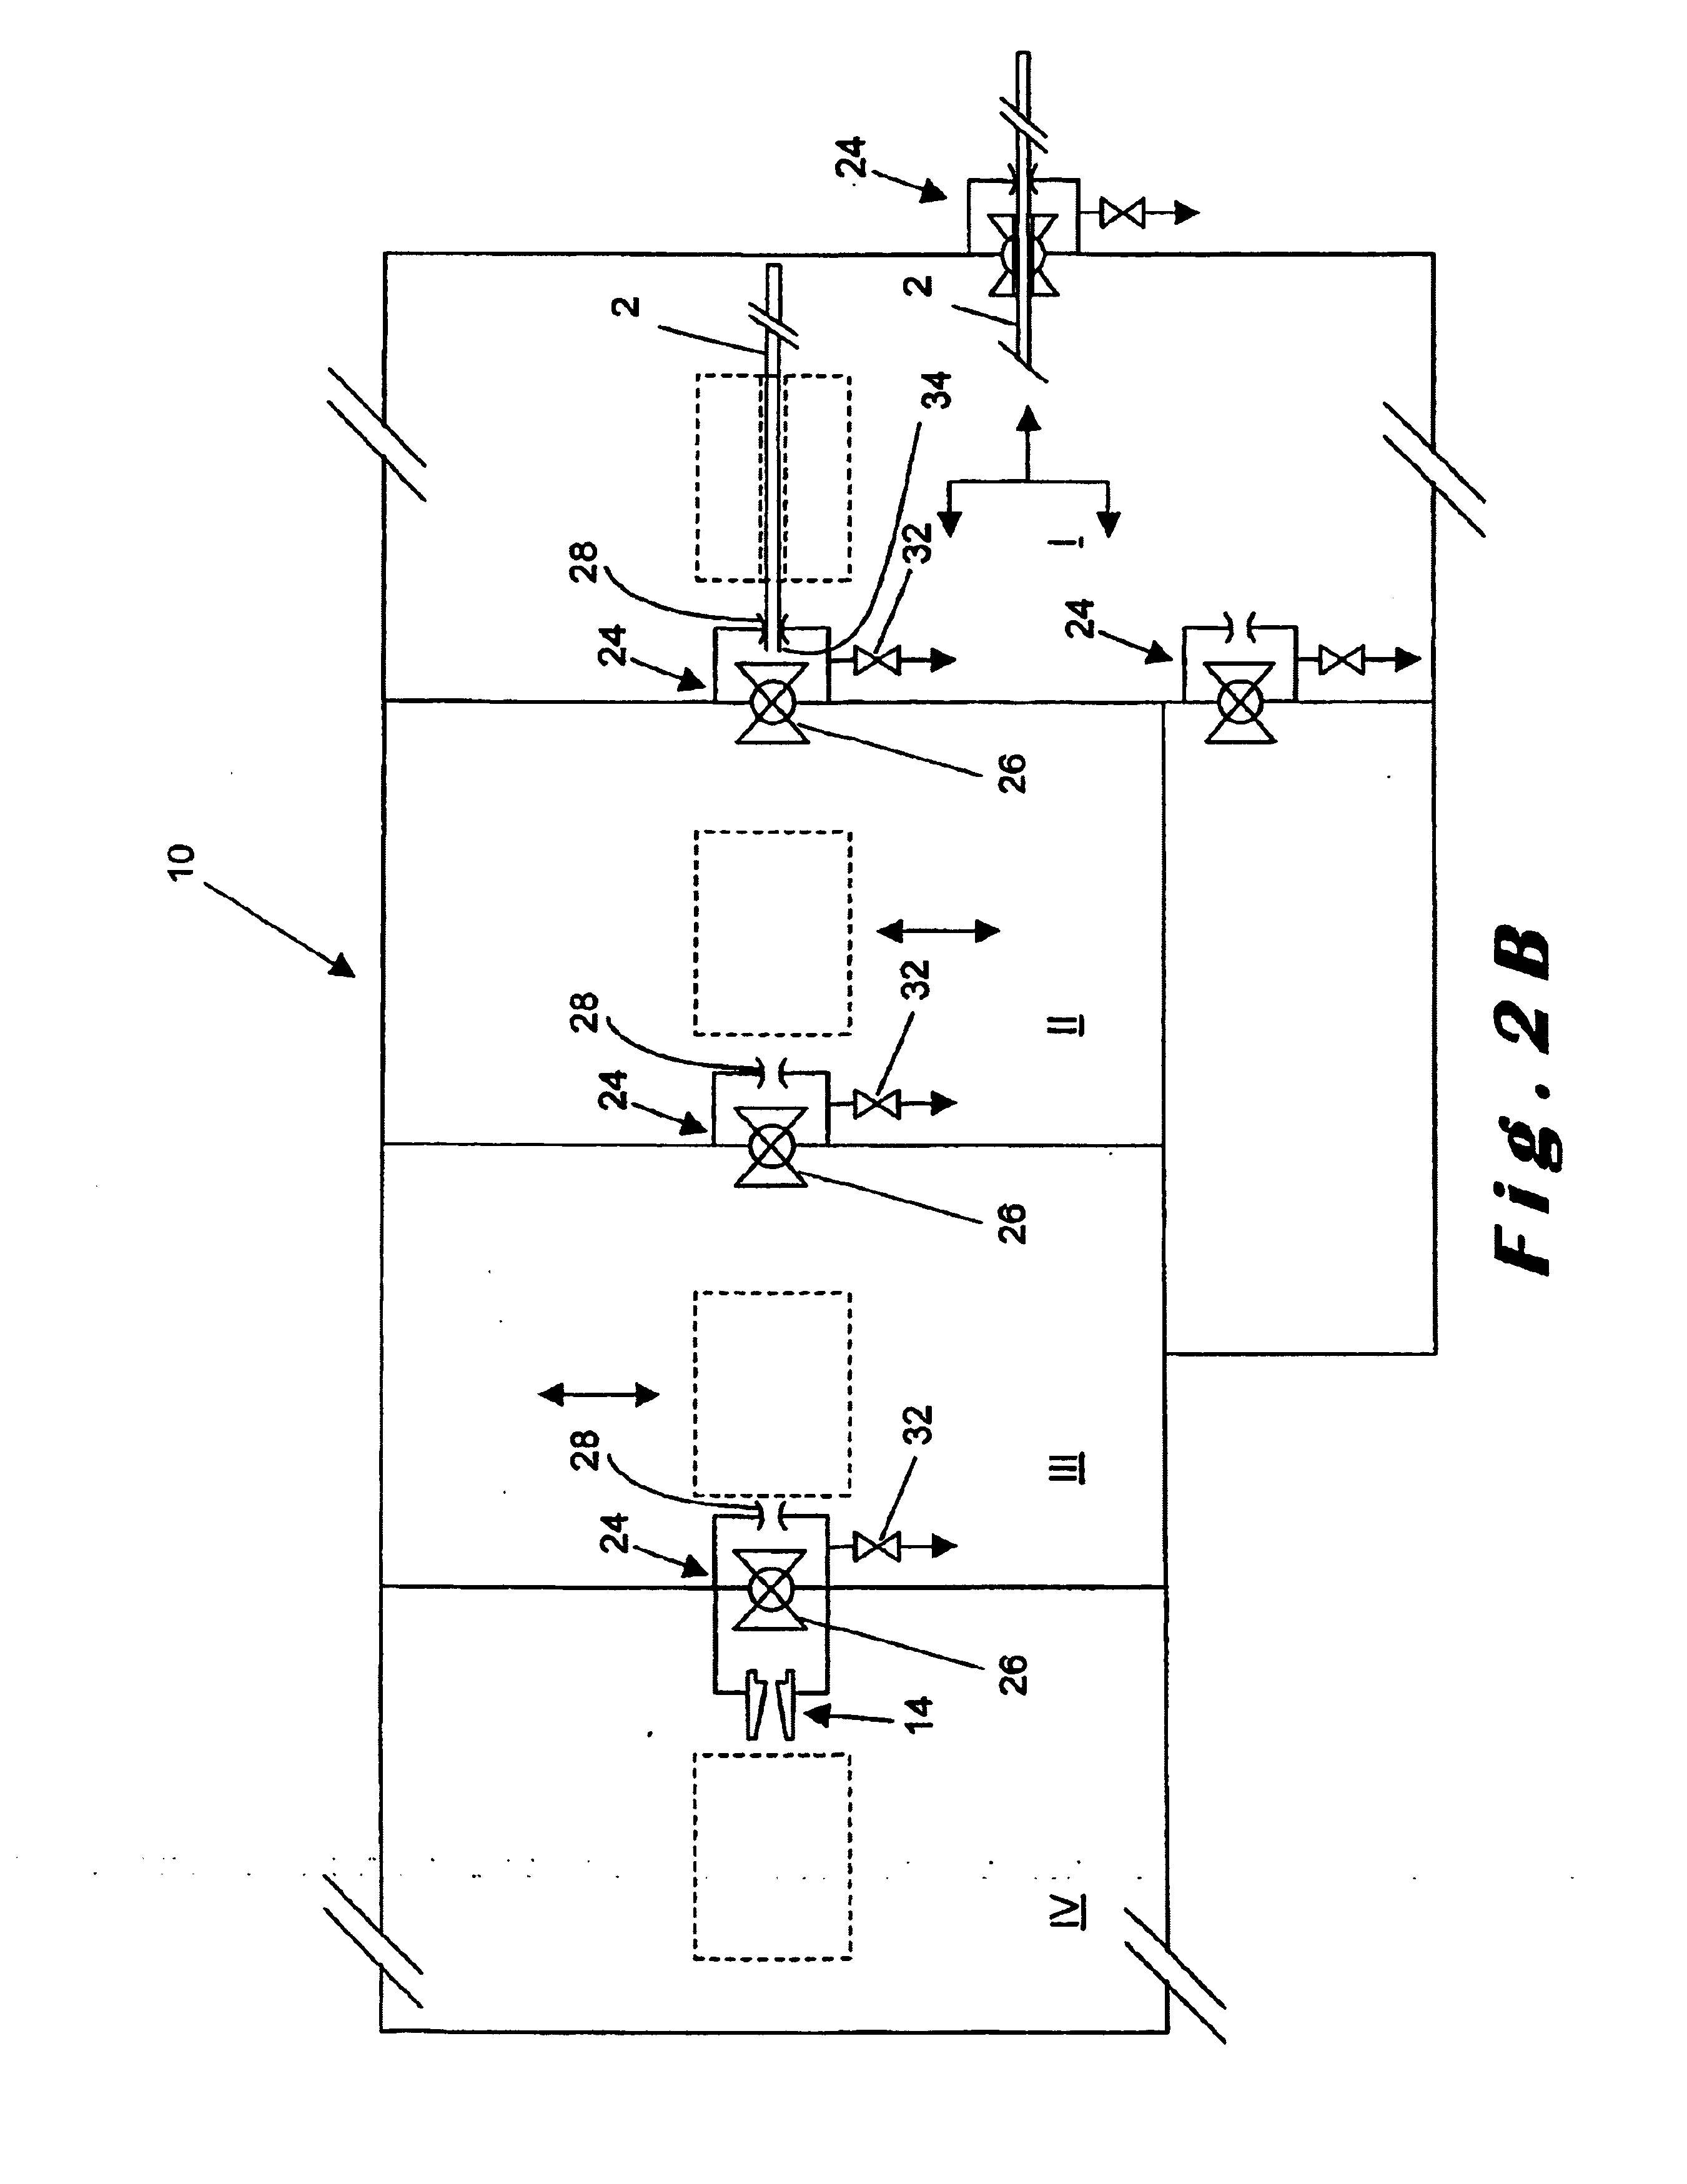 Method and device for manufacturing non-contaminated mox fuel rods